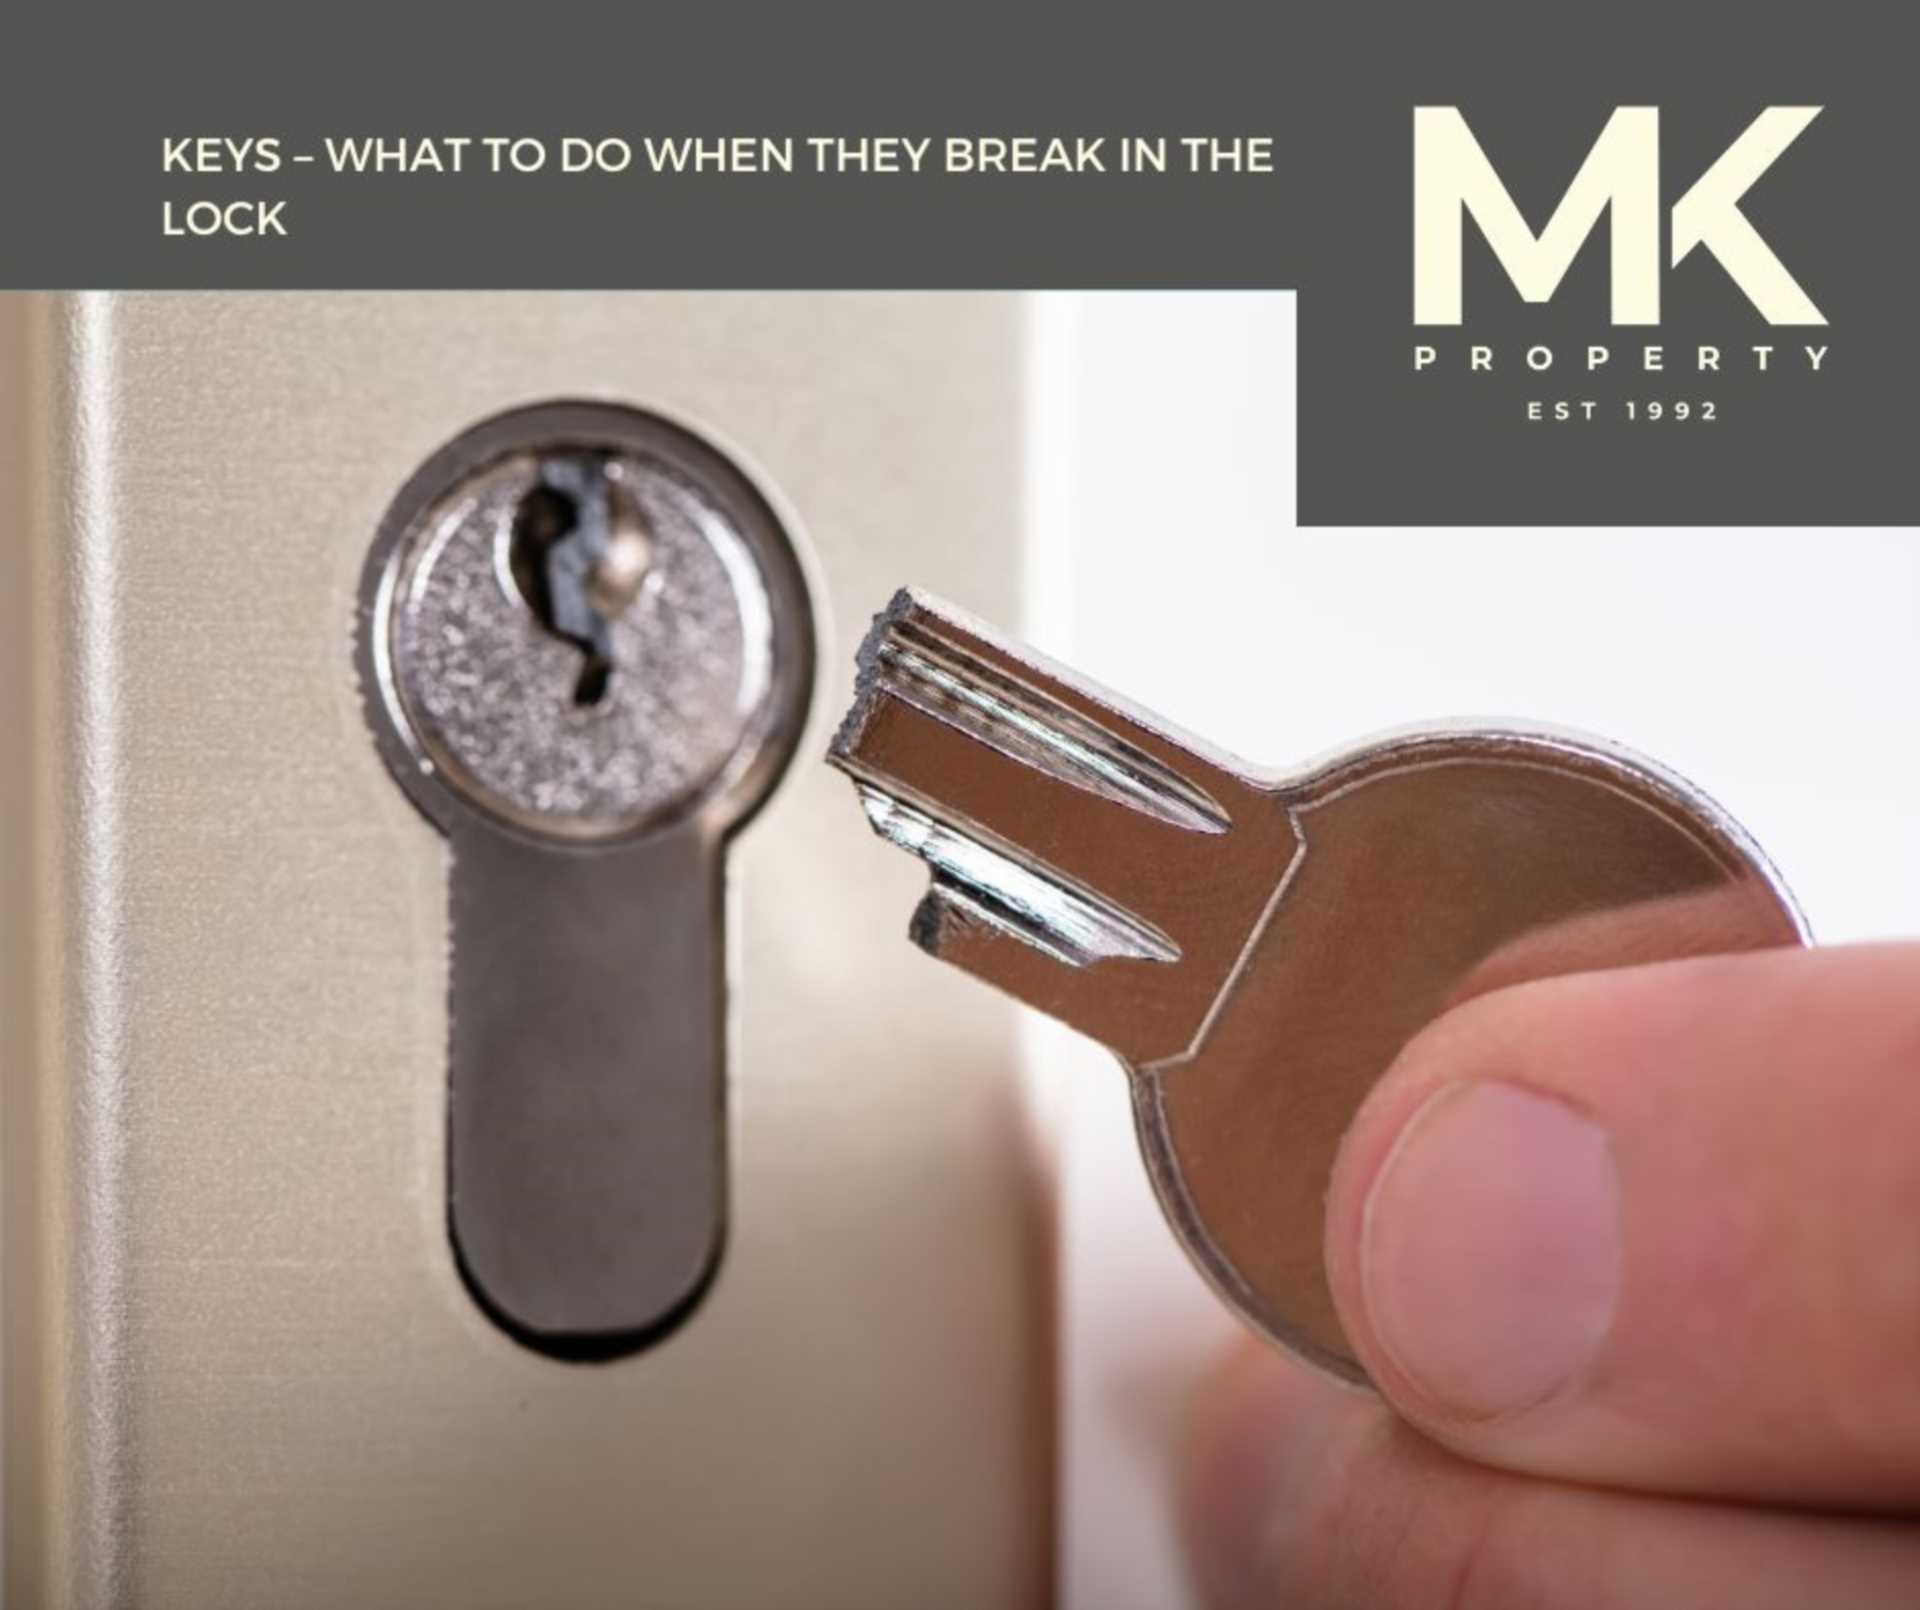 KEYS - What To Do When They Break In The Lock!